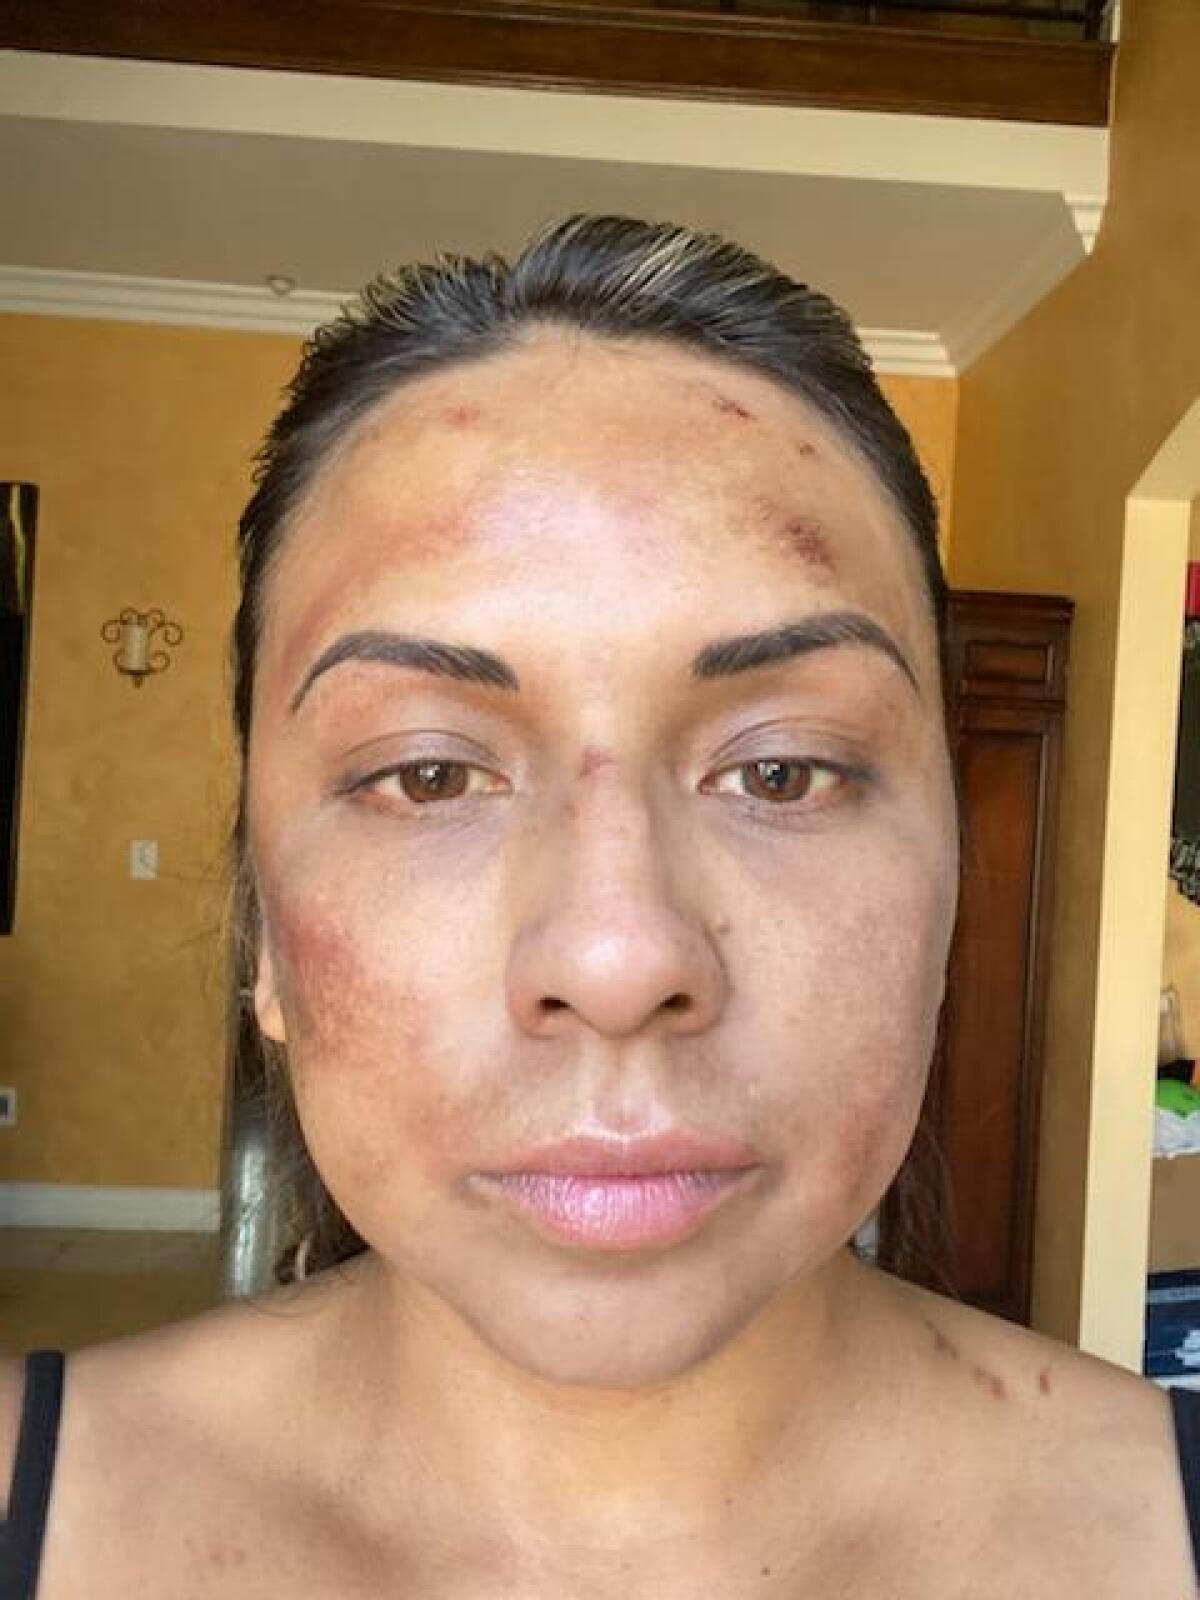 A woman with bruises and abrasions on her face 